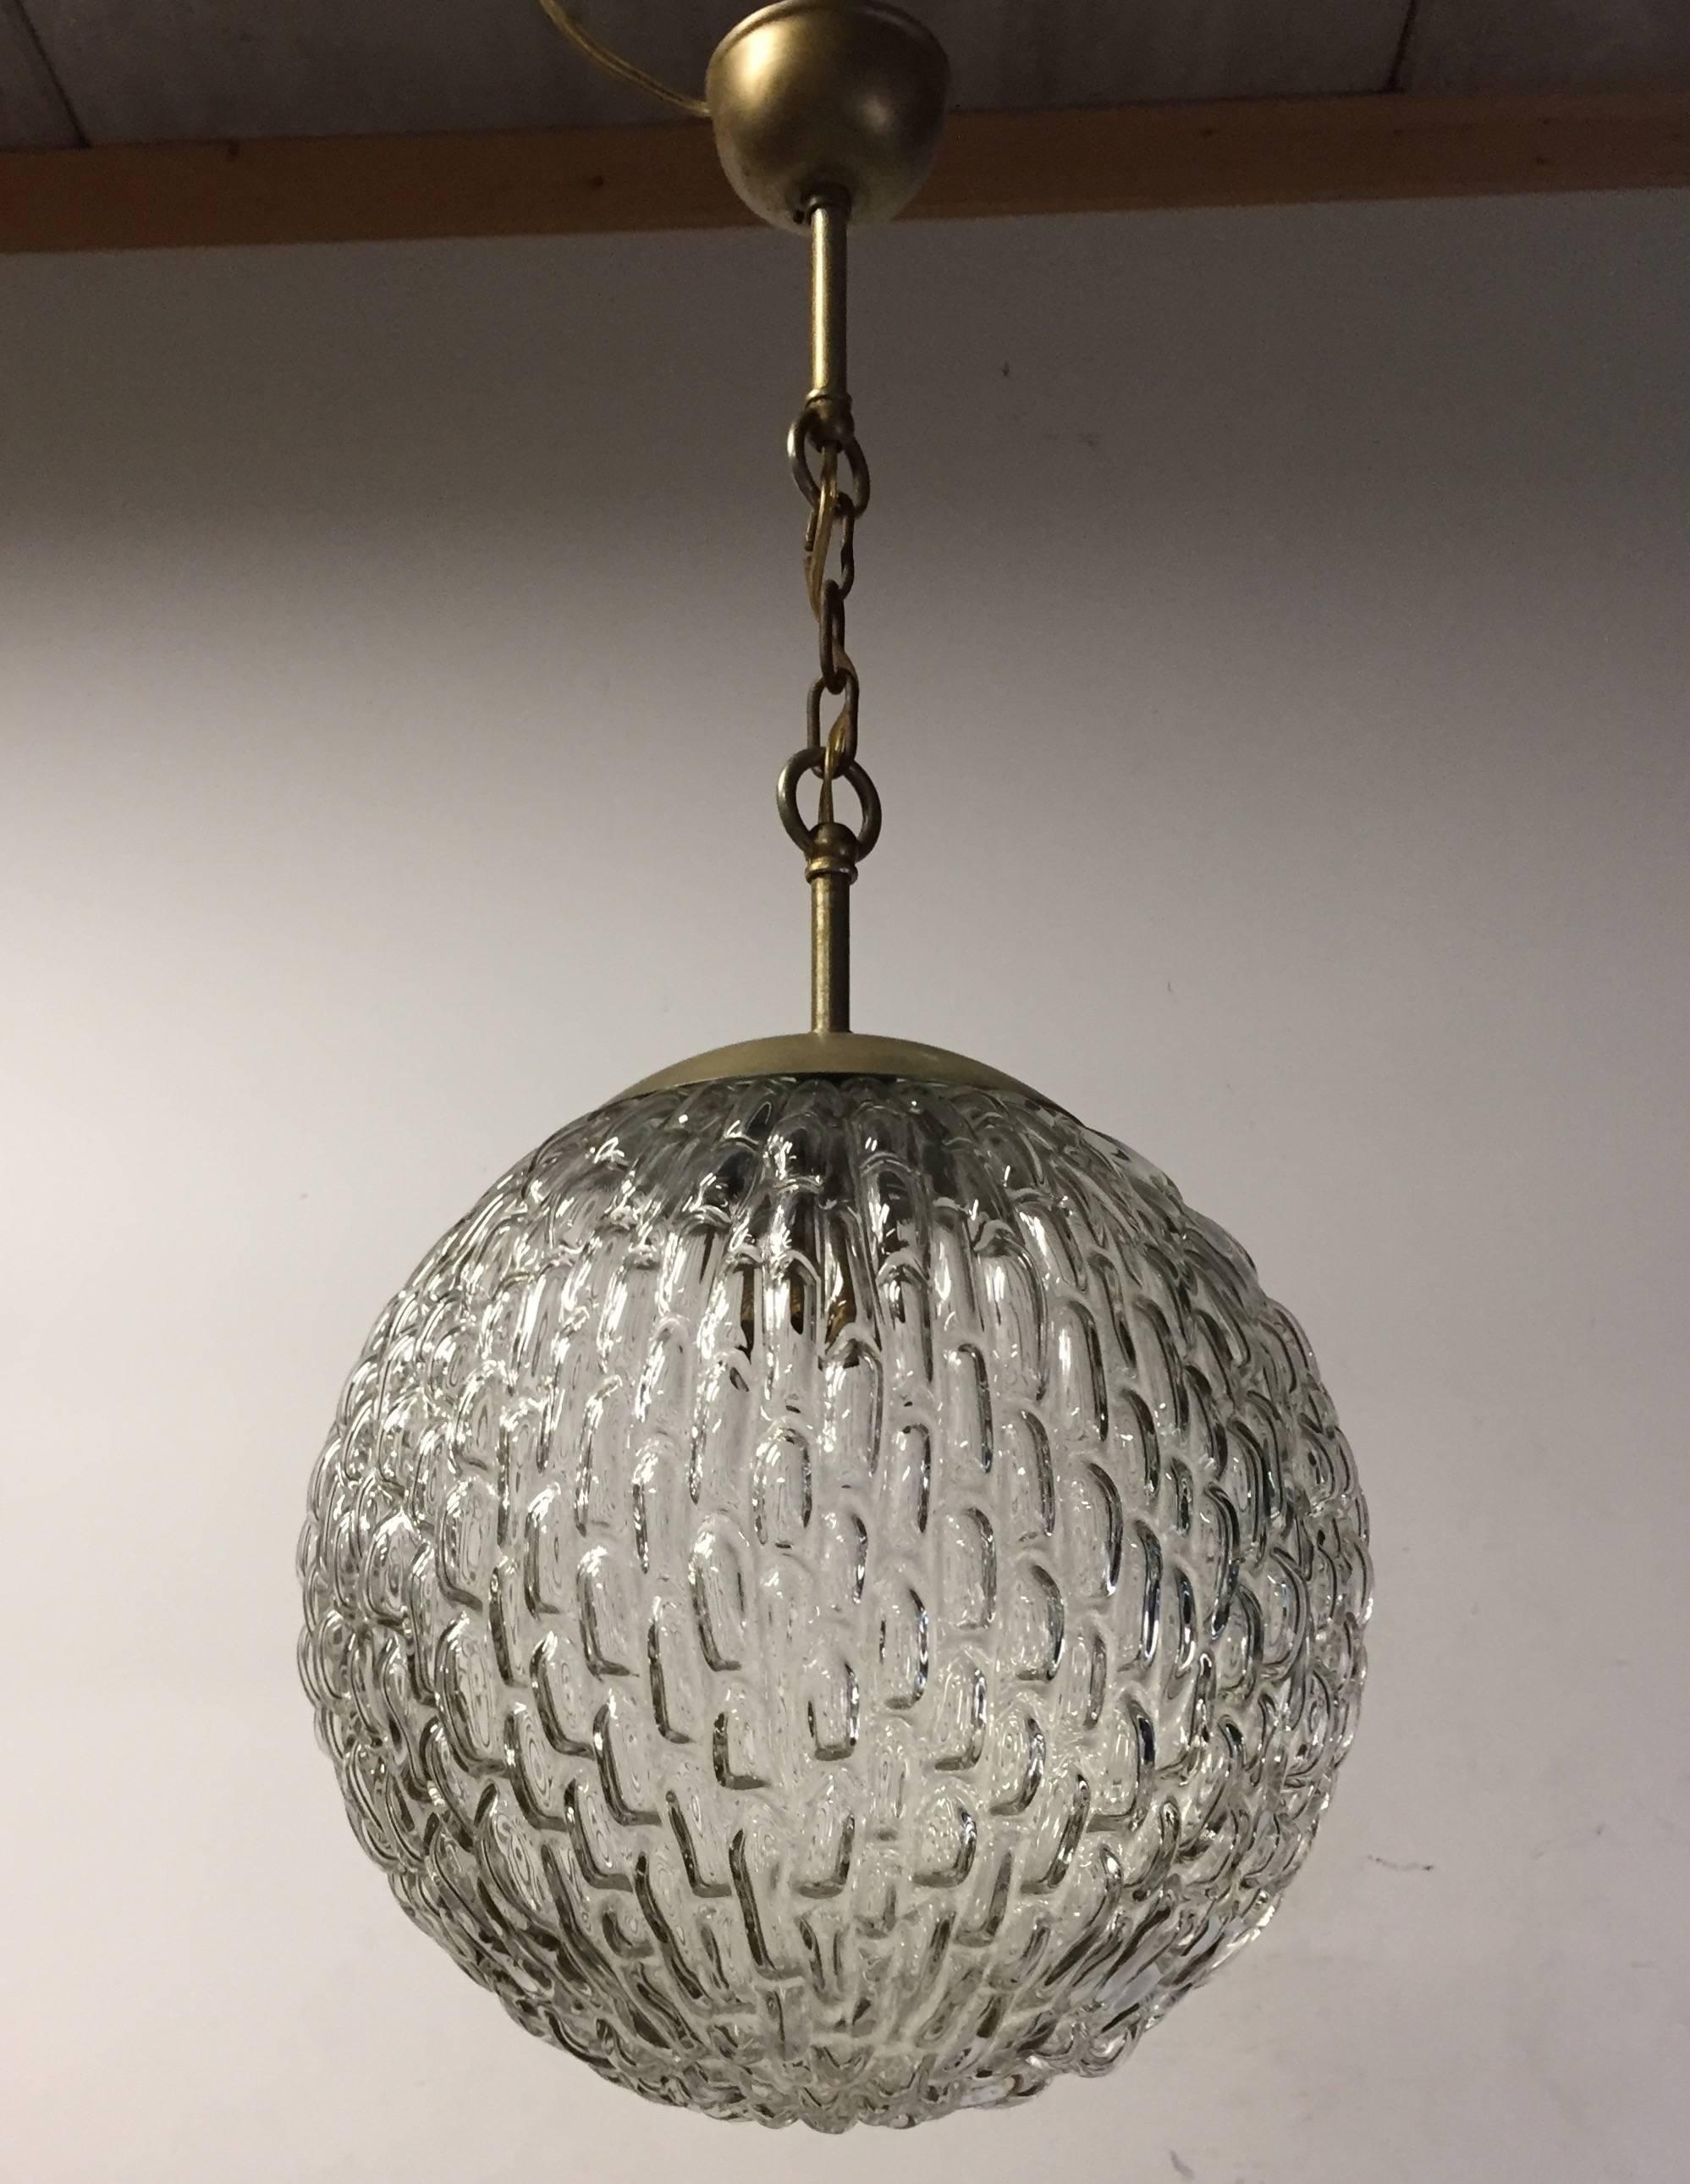 Practical size and handblown ceiling lamp with relief on the surface, probably by Glashütte Limburg. 

This mid-20th century glass pendant comes with the original chain and ceiling cap. The organic natural design of this pendant is a joy to watch